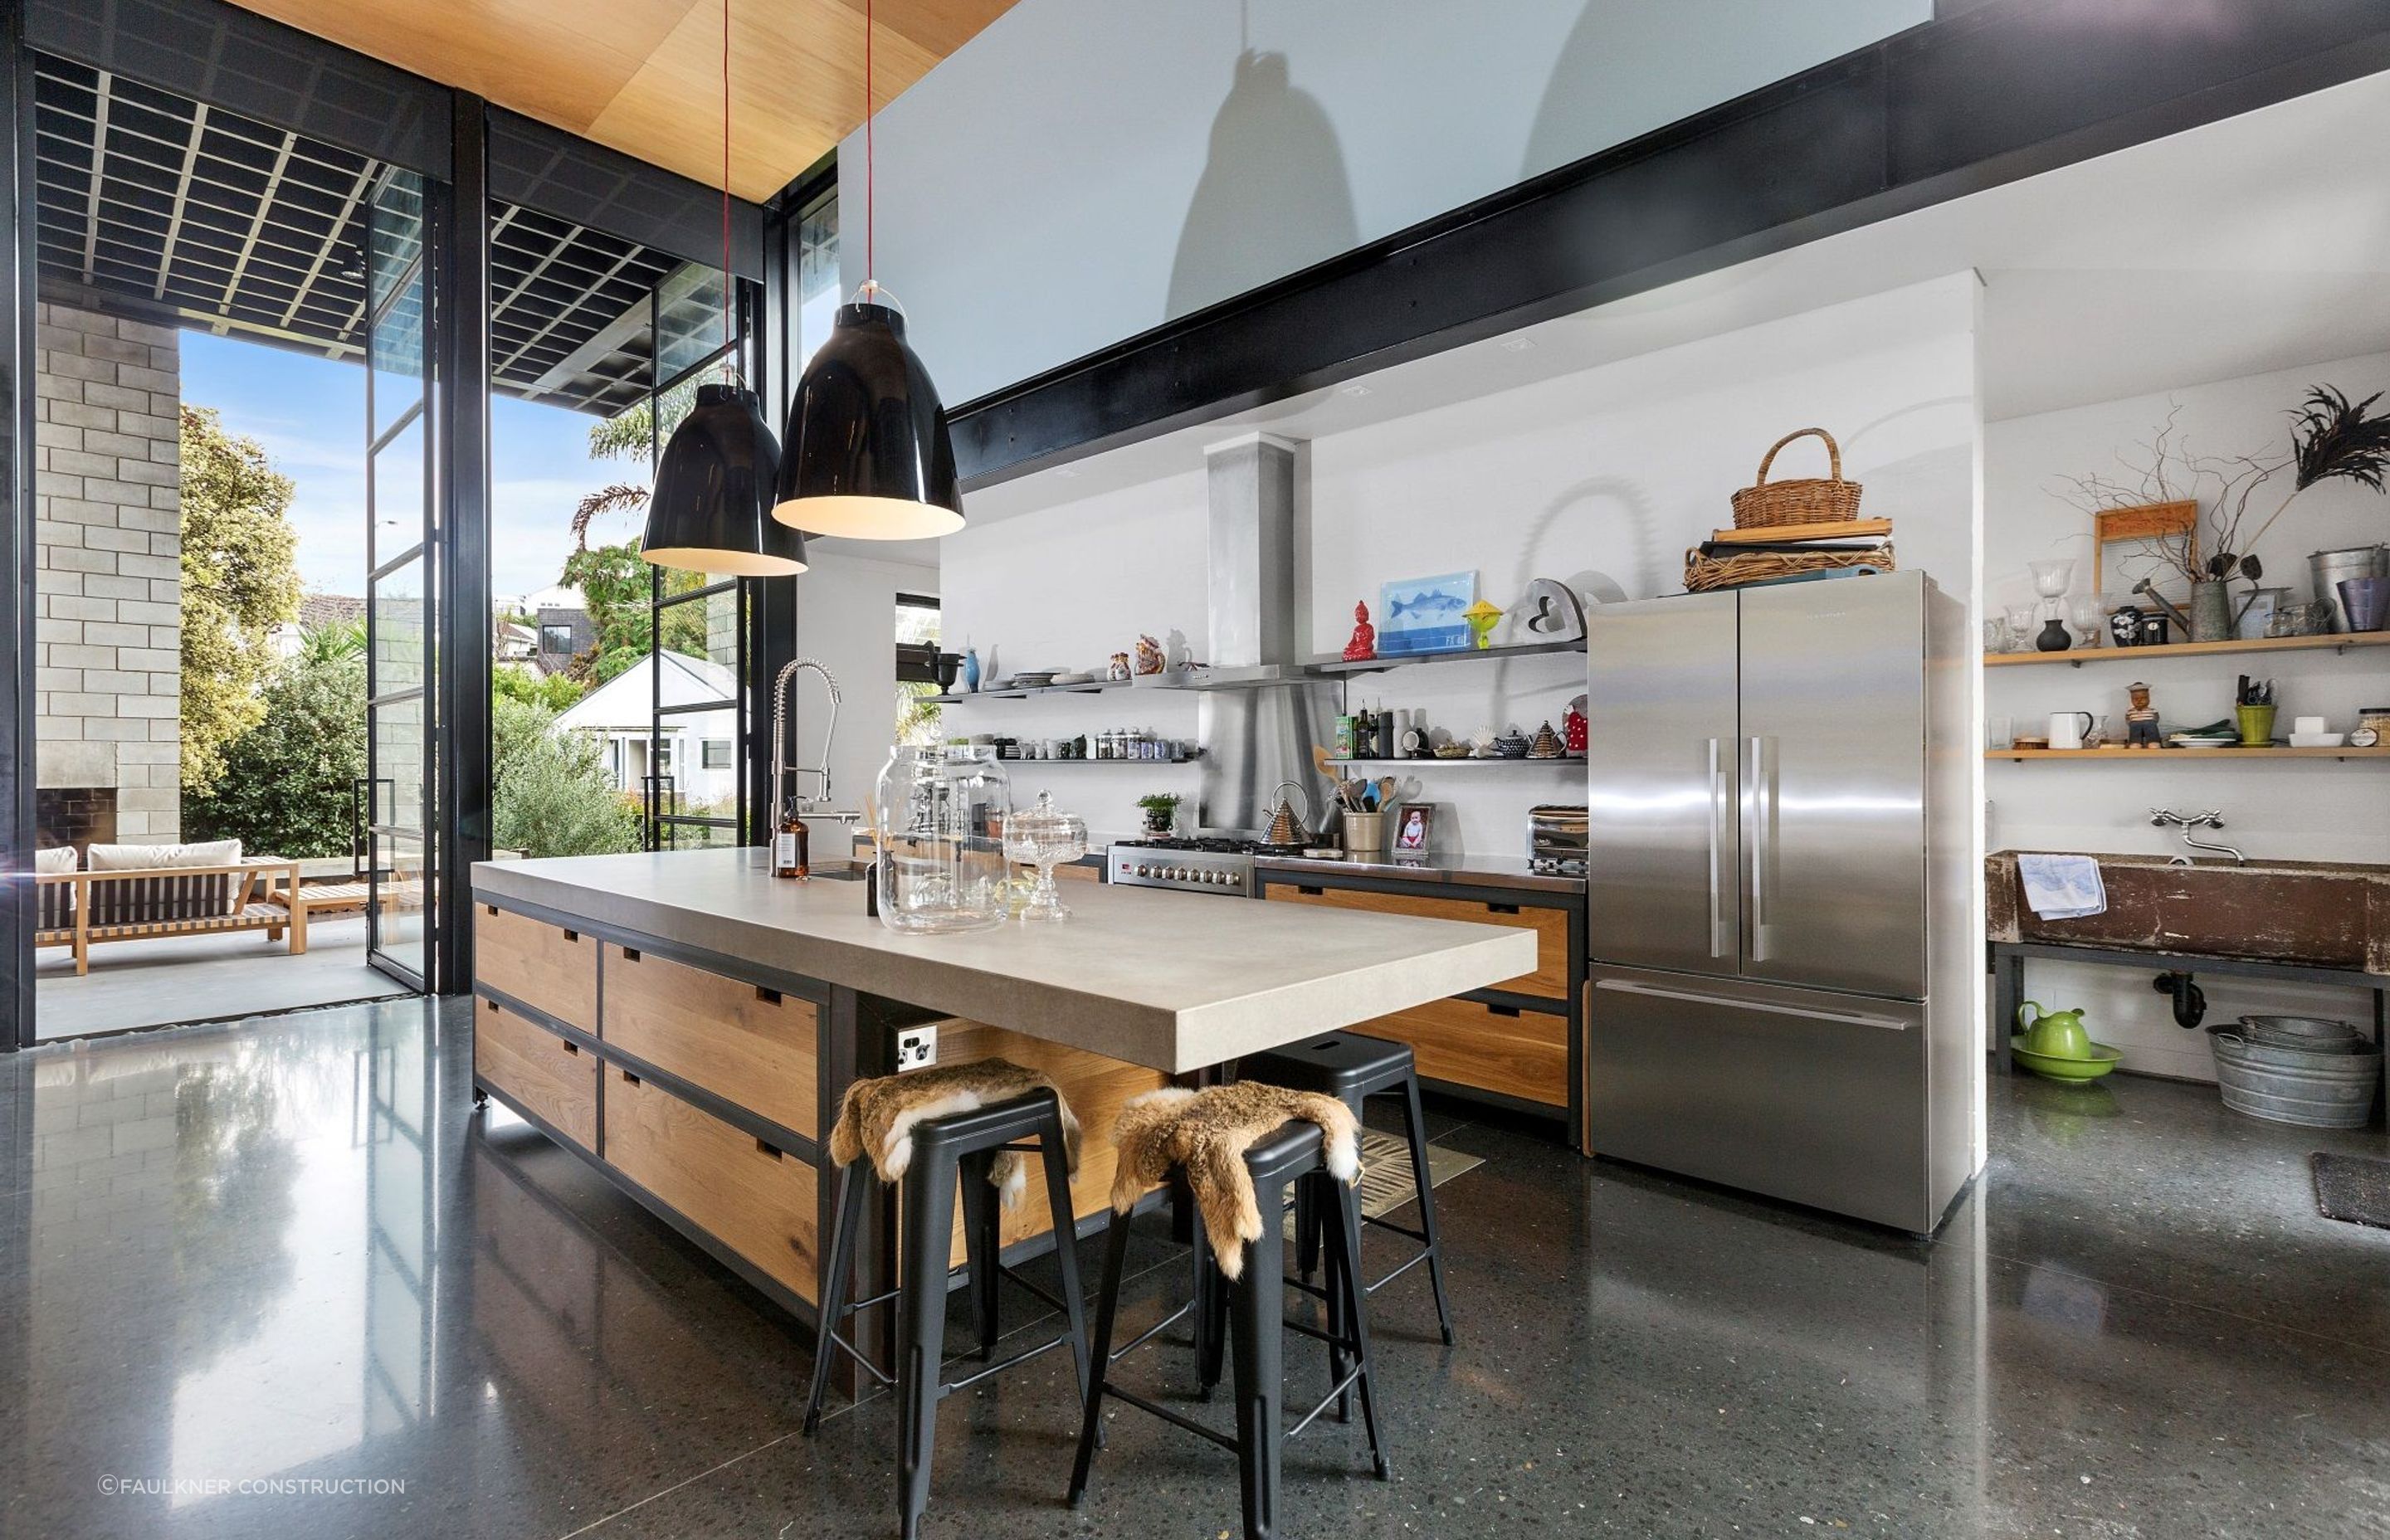 Vast open spaces, steel beams, robust furnishings and more help encapsulate the industrial style aesthetic in this superb home on Apihai Street in Orakei.